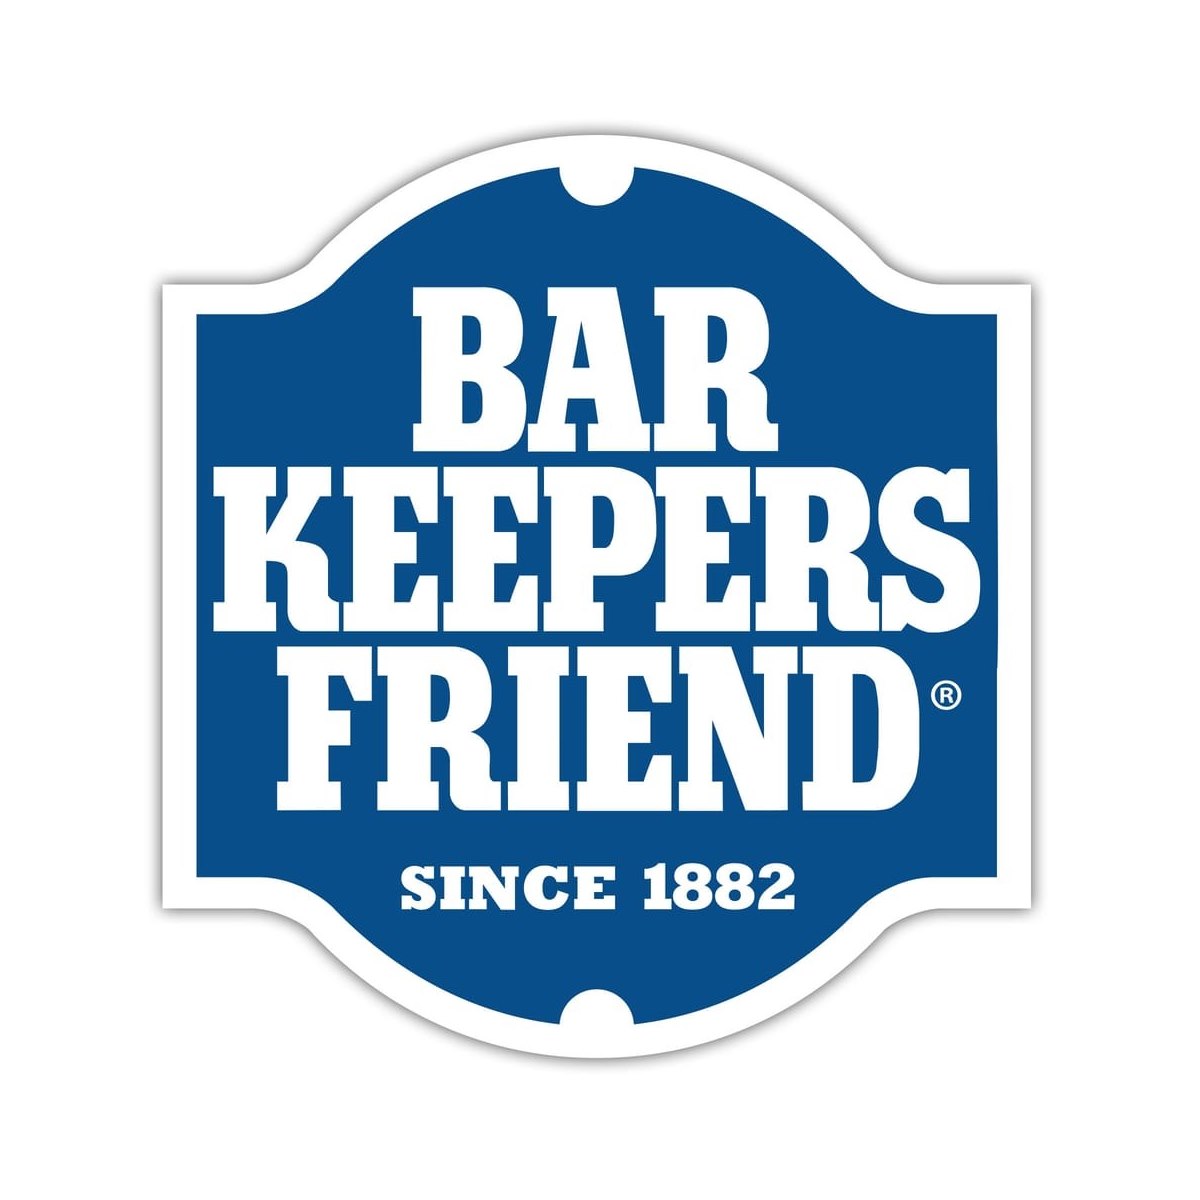 Where to Buy Bar Keepers Friend